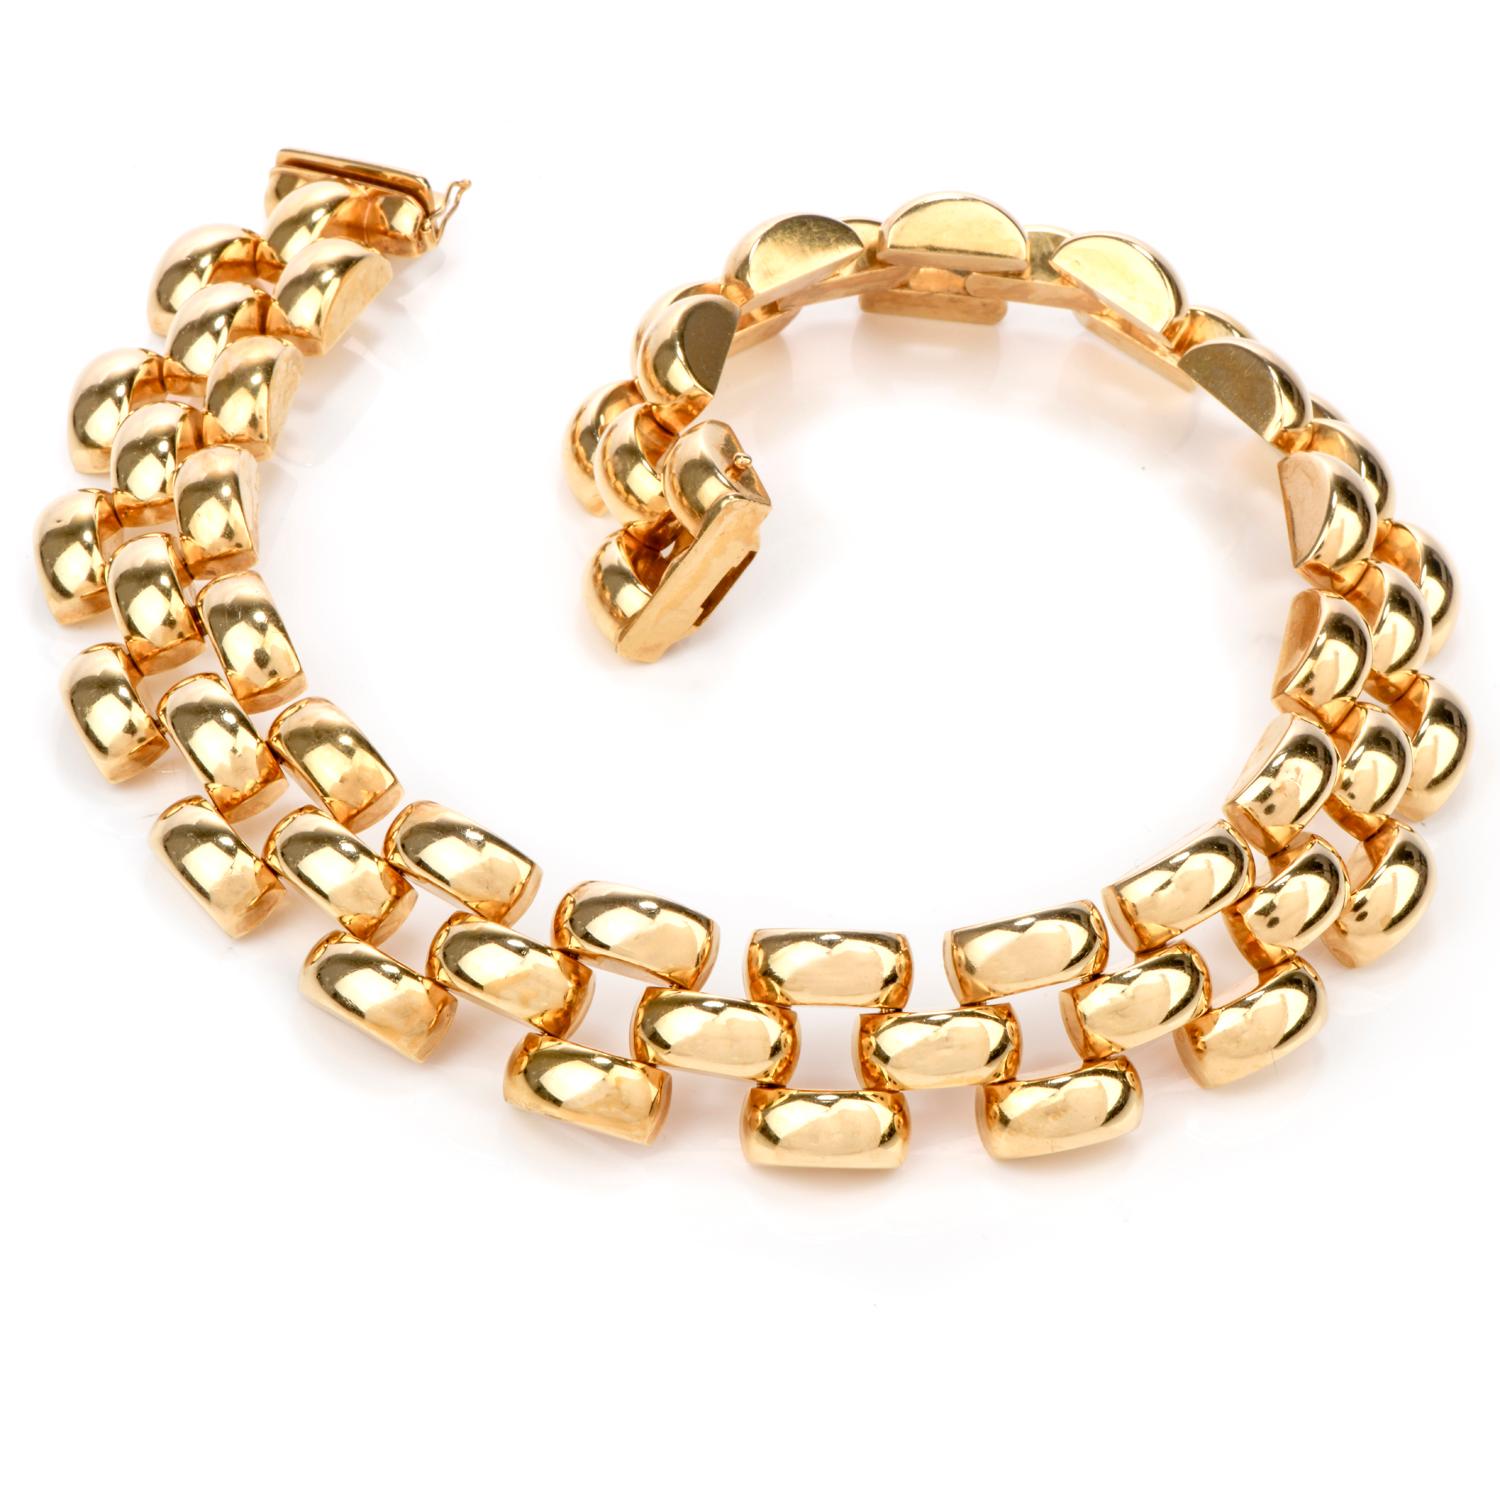 This chic vintage 1970's necklace consists of large interlocking links that measure

appx. 7/8 inch wide and is appx. 16 inches in length with the neck opening

at appx. 15 Inches. 

3 wide Bright high polished links adorn throughout.

Great to wear